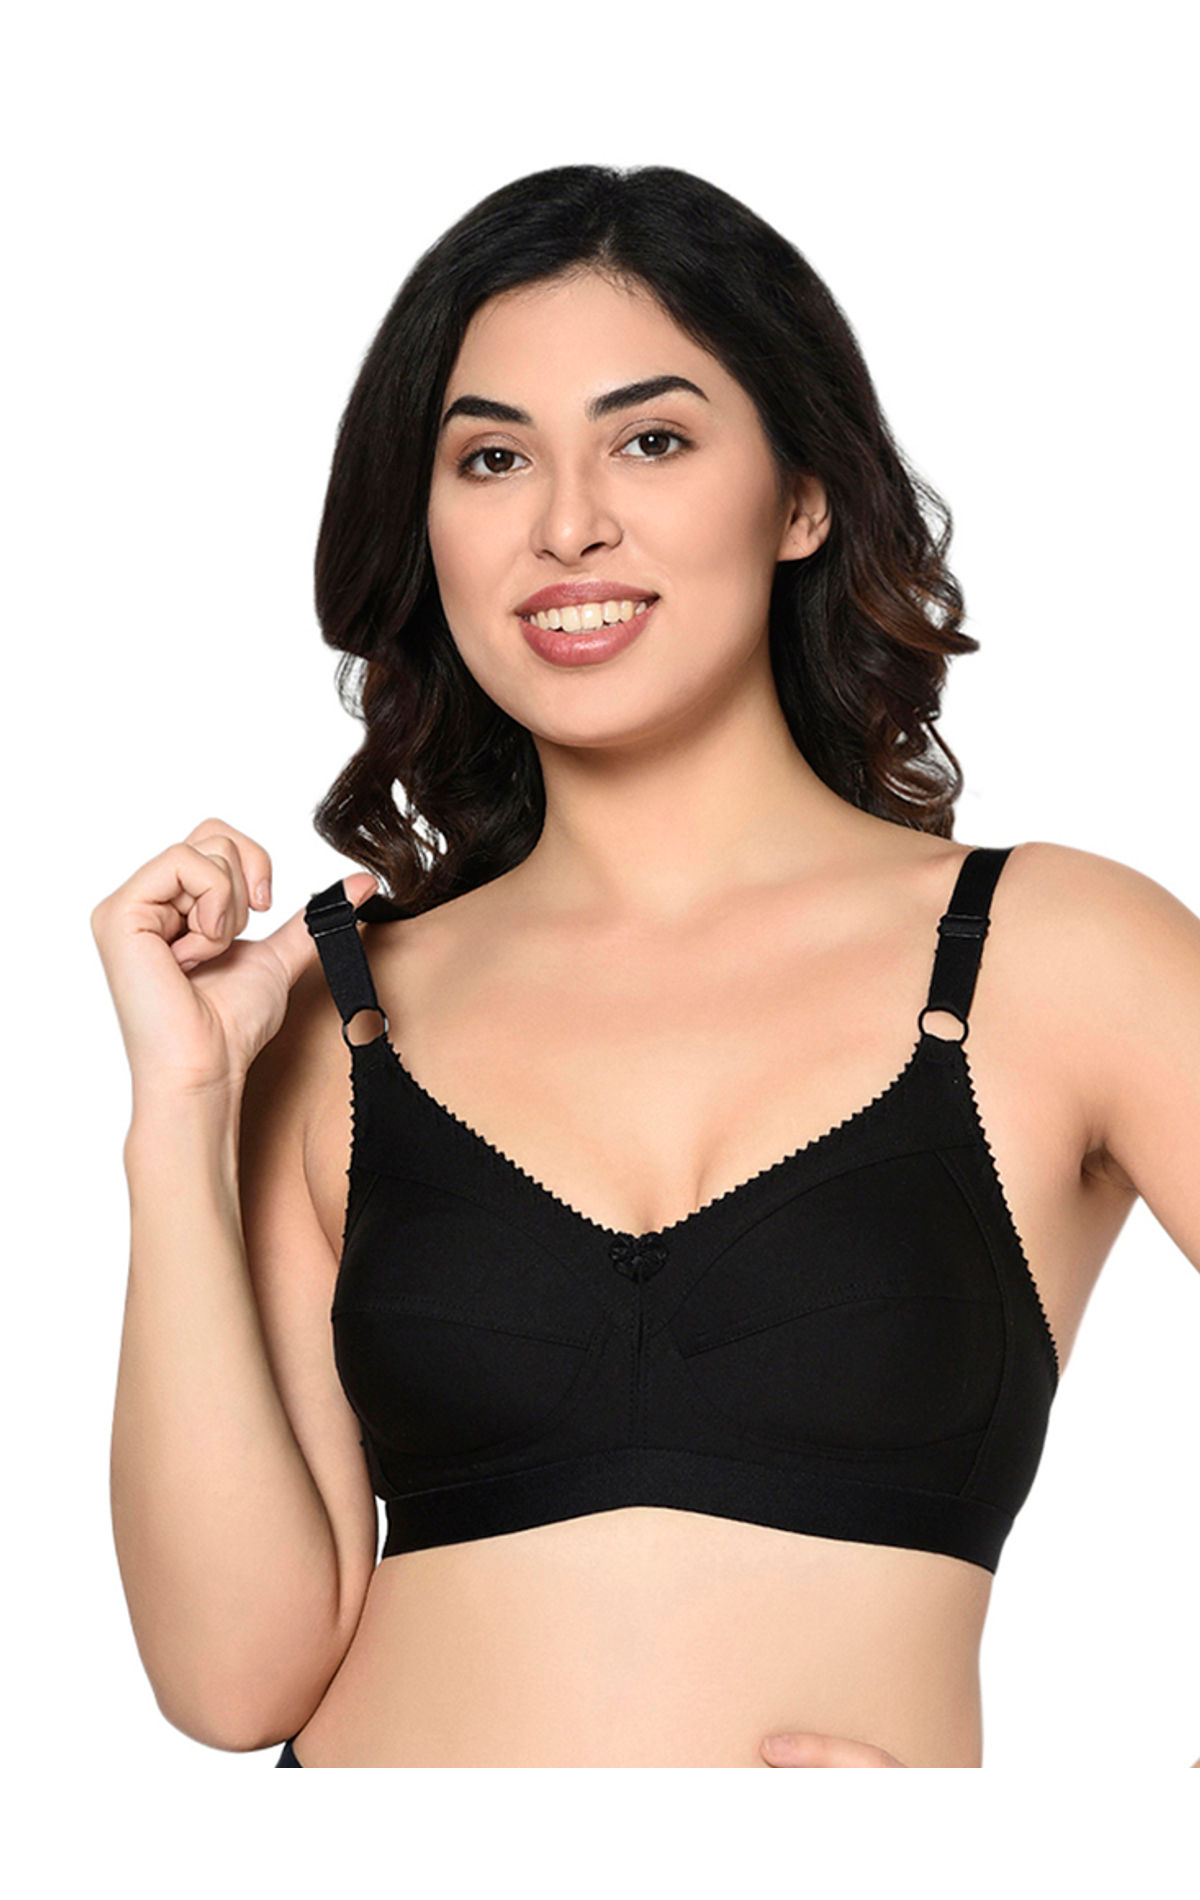 Bodycare 38c Seamed Bra - Get Best Price from Manufacturers